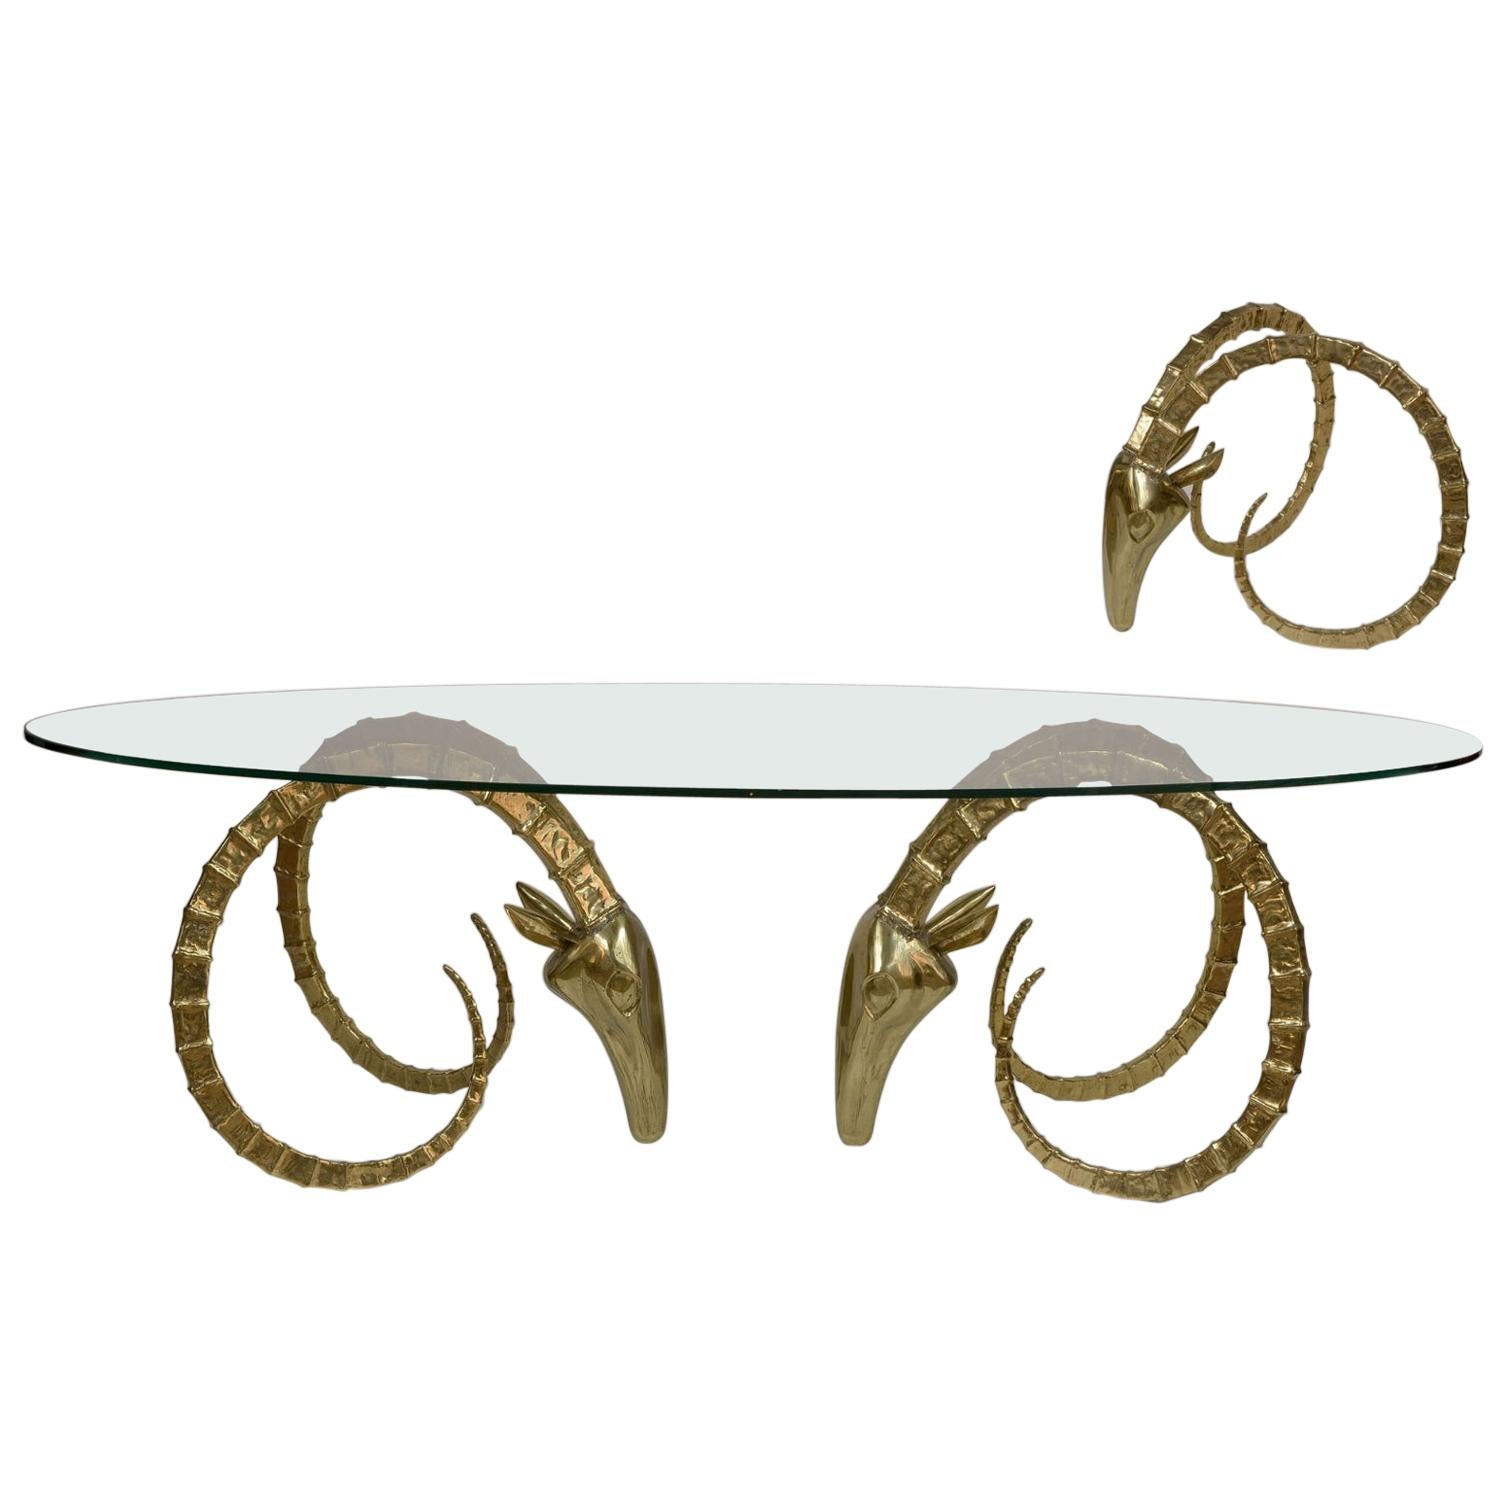 Alain Chervet Hollywood Regency, Ibex Table Signed and Numbered in Gilt Bronze For Sale